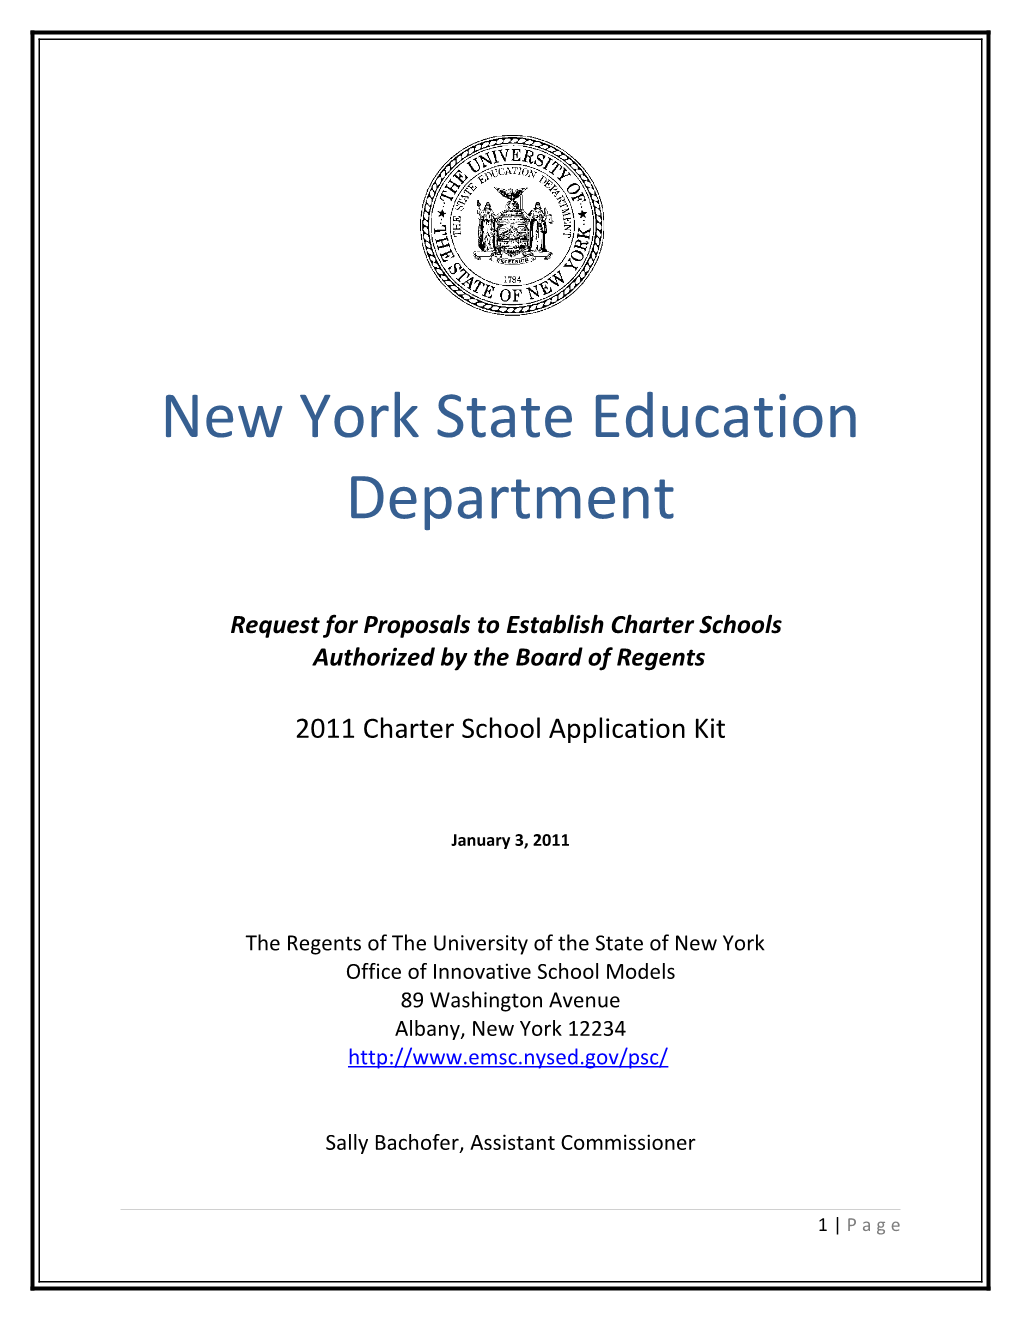 New York State Education Department s3